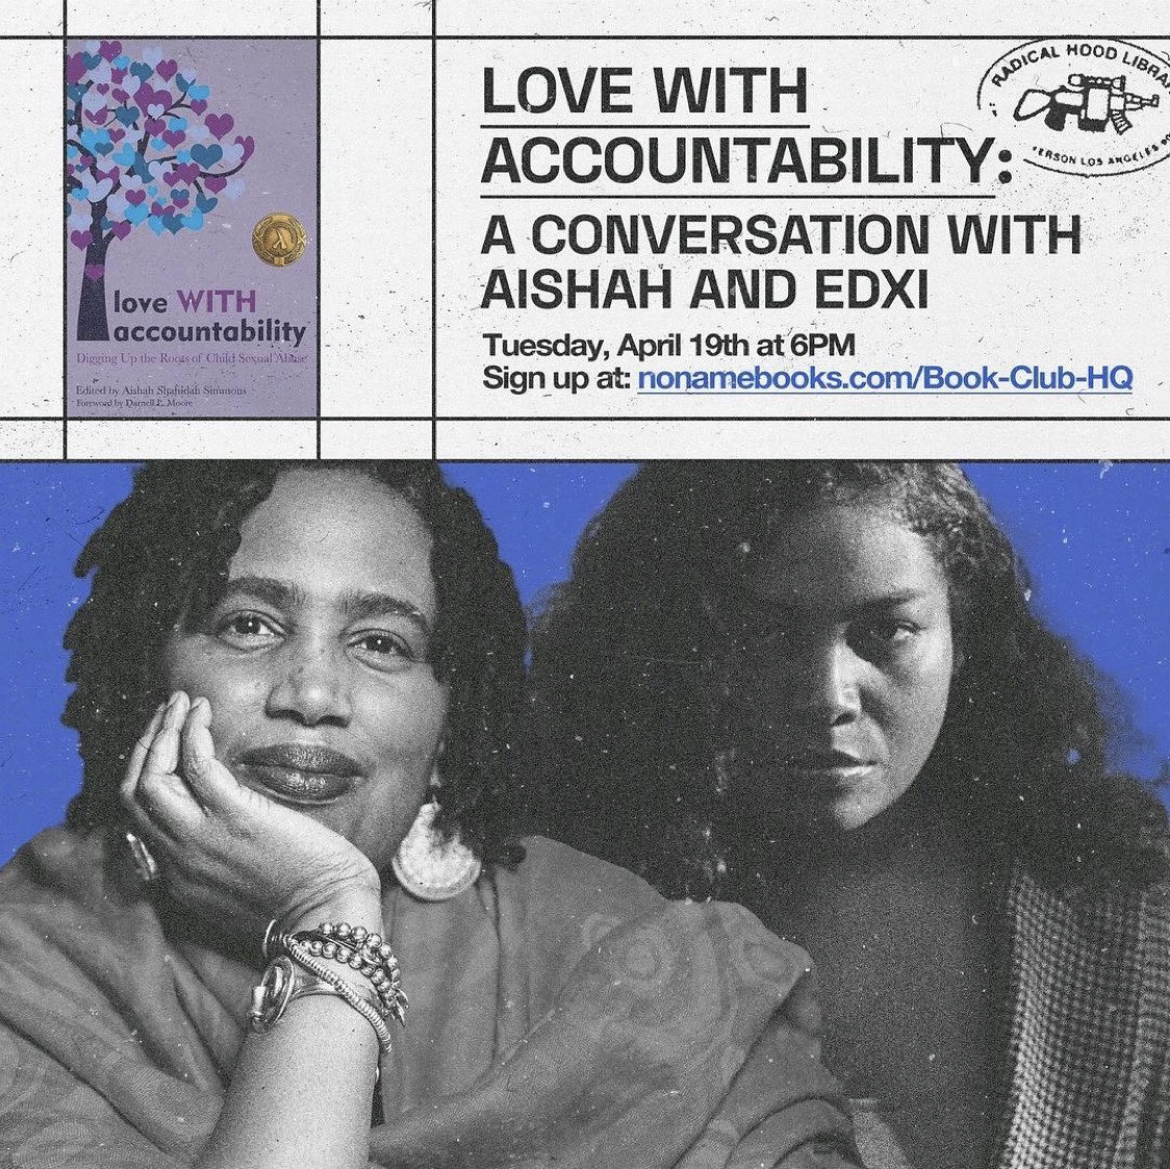 ID: Graphic reads, "Love WITH Accountability: A Conversation with Aishah and Edxi Tuesday, April 19th at 6PM Sign up at nonamebooks.com/Book-Club-HQ" Graphic features the front cover of Love WITH Accountability: Digging up the Roots of Child Sexual Abuse depicting a tree with blue and purple hearts as foliage. Below the text and cover is a black and white photograph of Aishah Shahidah Simmons and edxi. photo creds from left to right: @zheechatmon and @keitadonazu